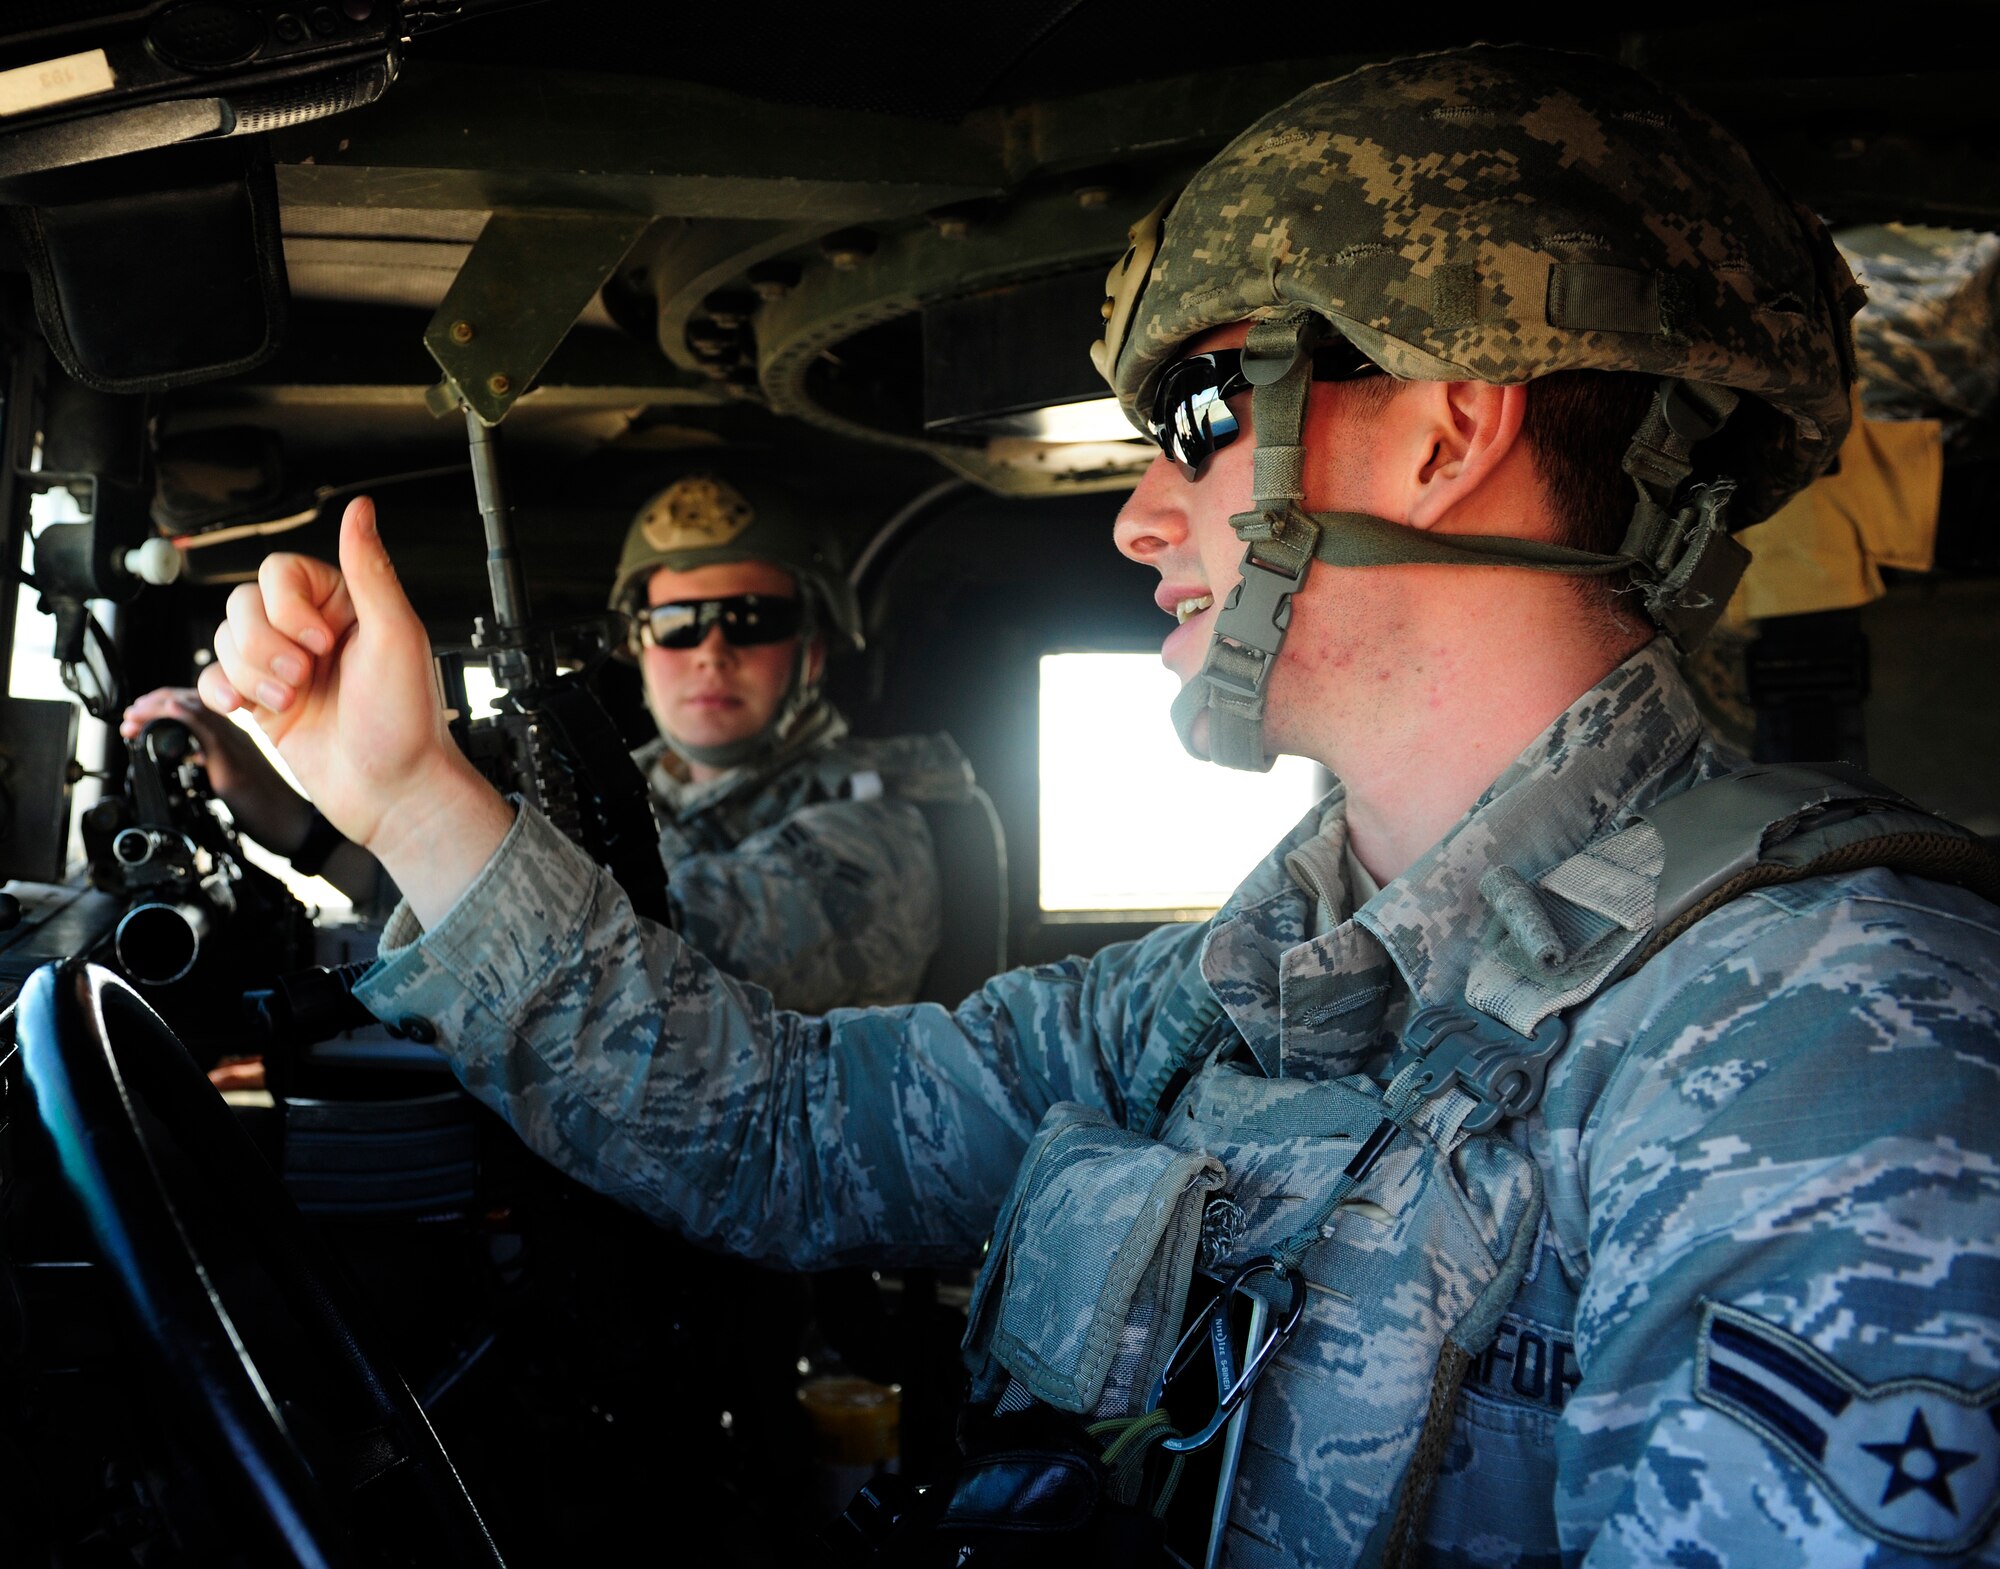 Airmen 1st Class Cody Rawson, right, and Jonathan Waggoner, 39th Security Forces Squadron security response team members, speak while participating in an exercise Jan. 15, 2016, at Incirlik Air Base, Turkey. The exercise tested security forces ability to respond to insider threats and practice convoy operations. (U.S. Air Force photo by Senior Airman Krystal Ardrey/Released)